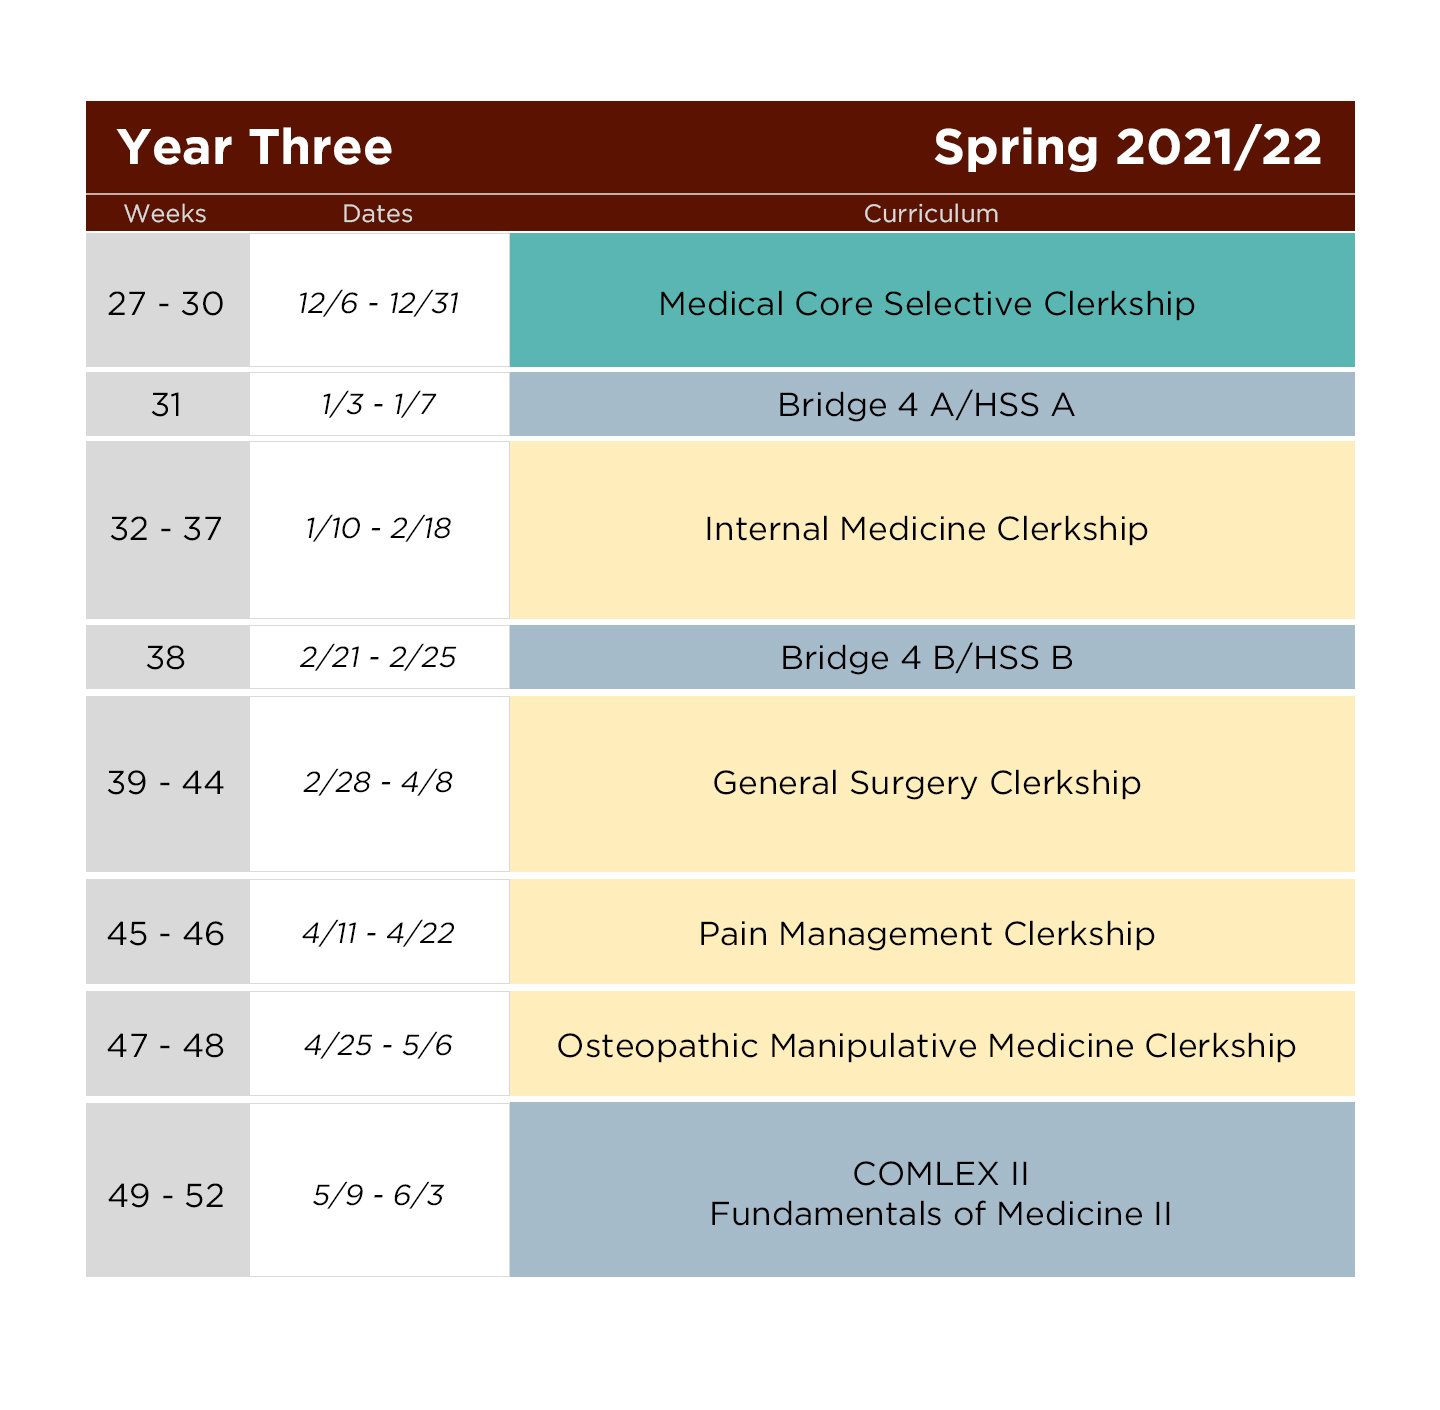 A sample of the schedule for Spring 2022 Year Three Clerkship